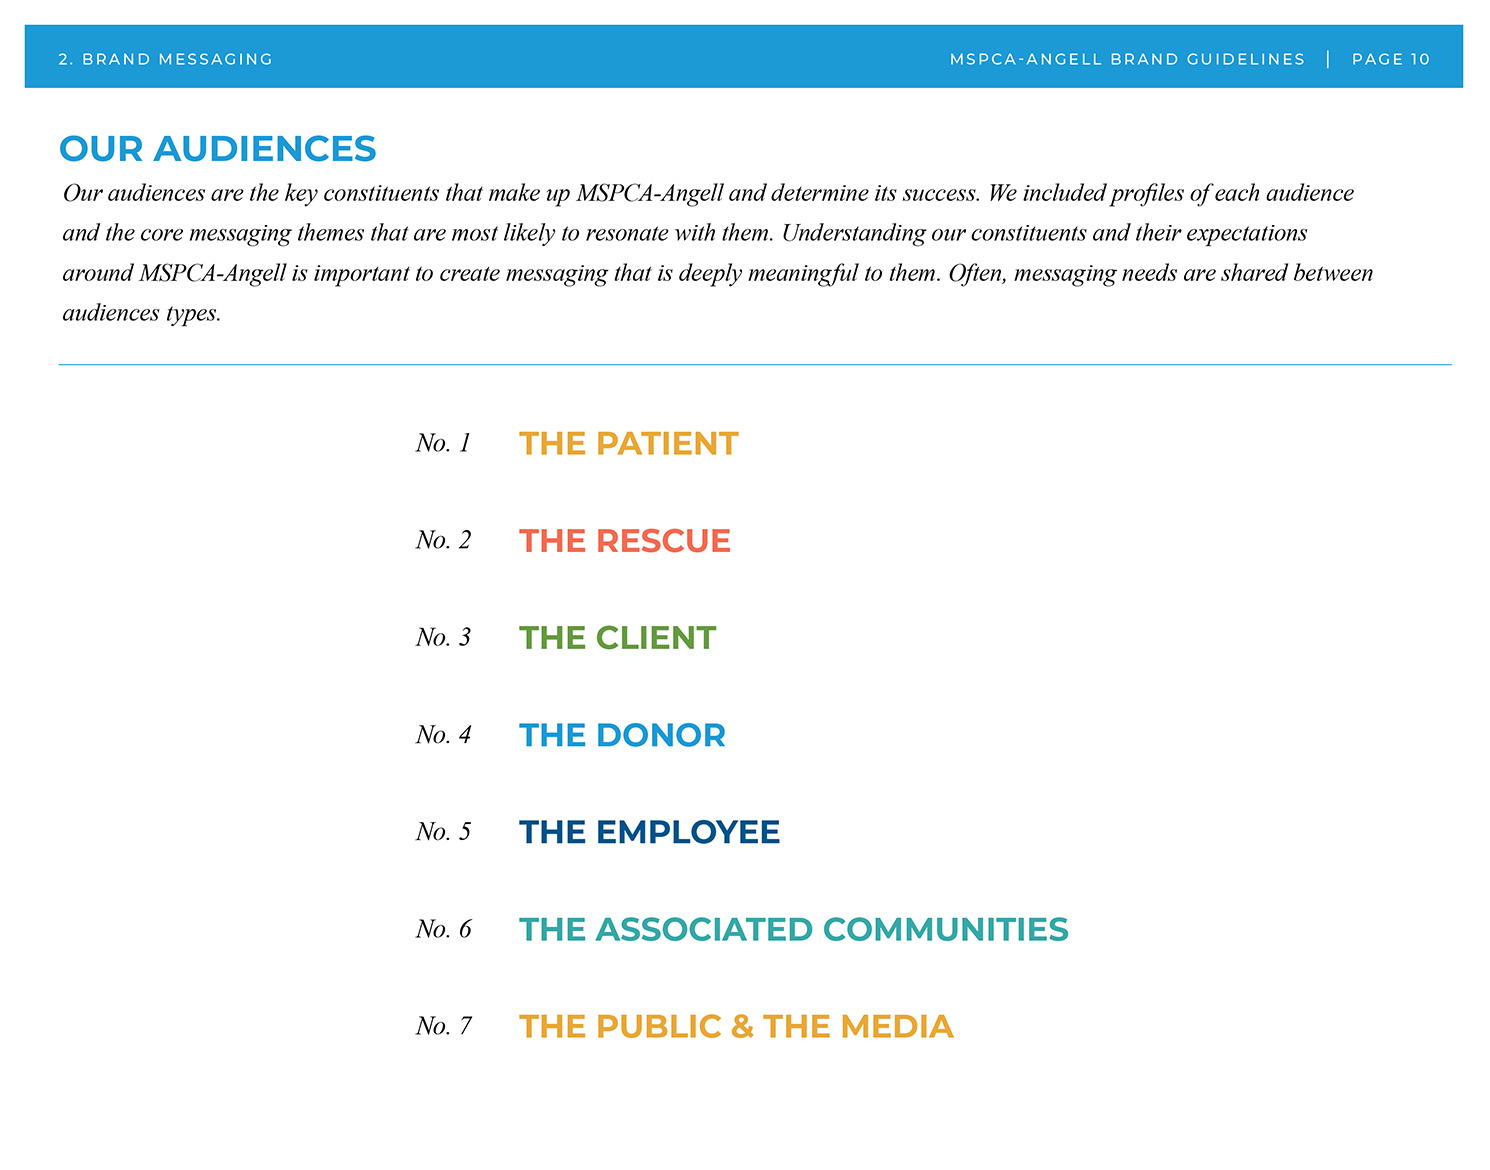 MSPCA-Angell brand guide audiences list